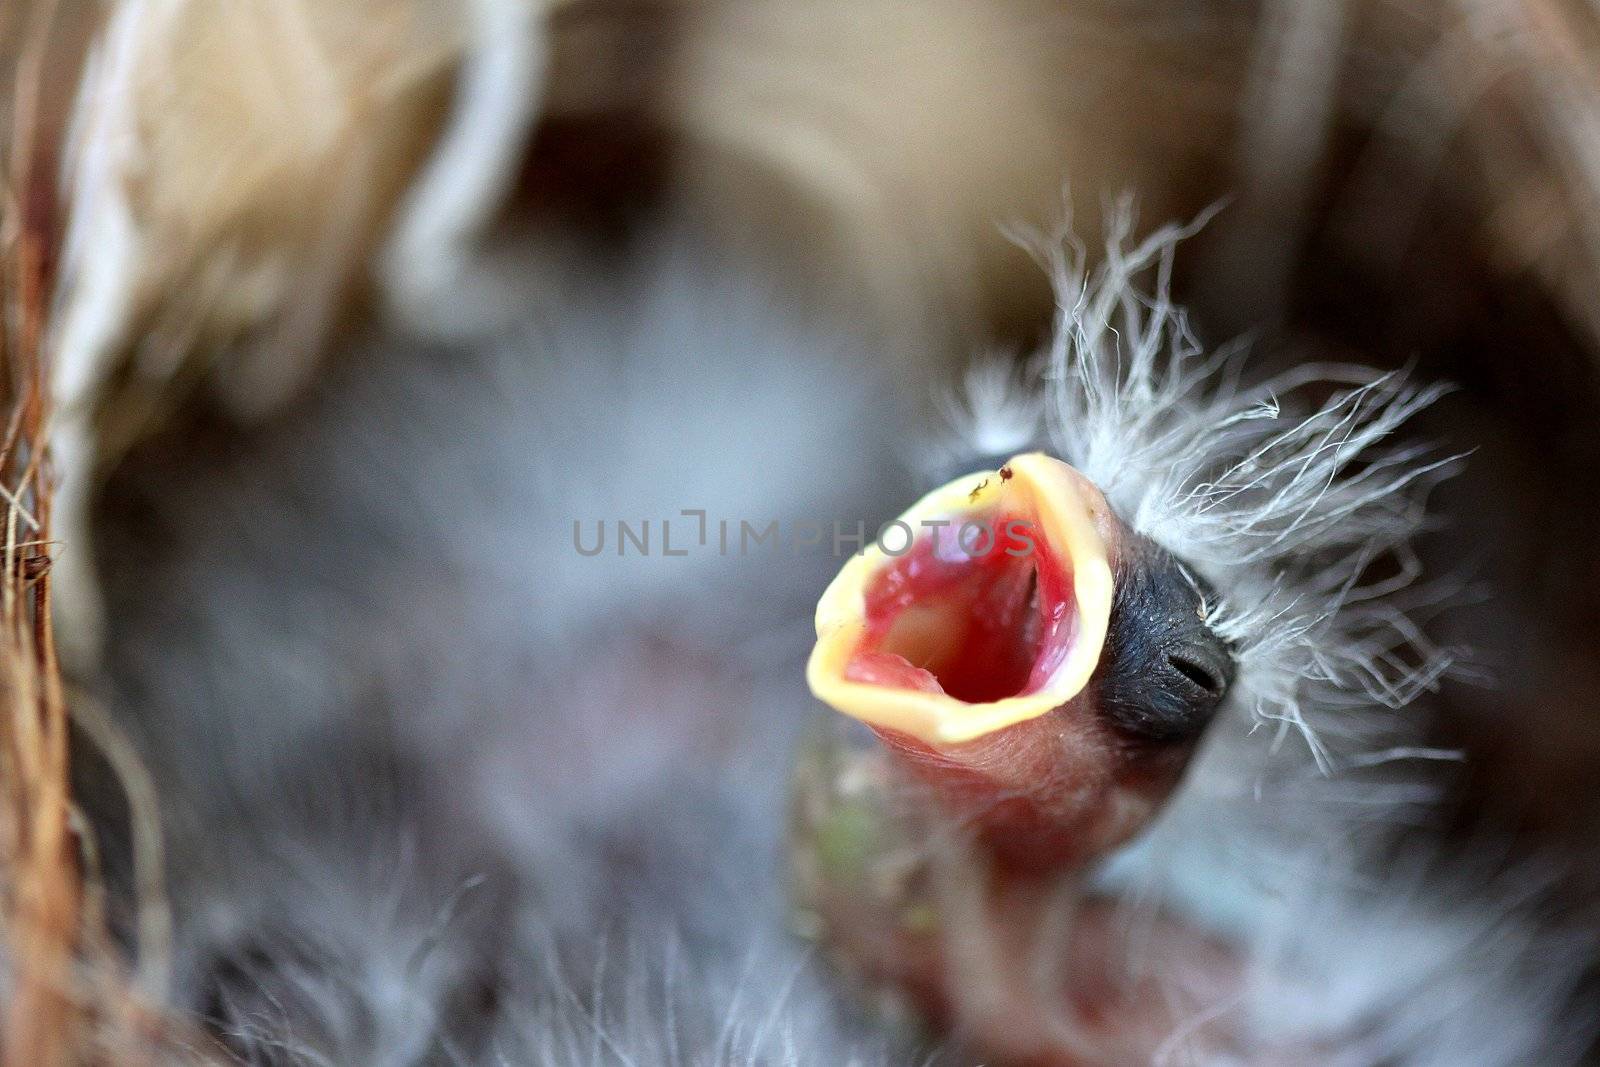 Close up of a bird nest with a baby in it.